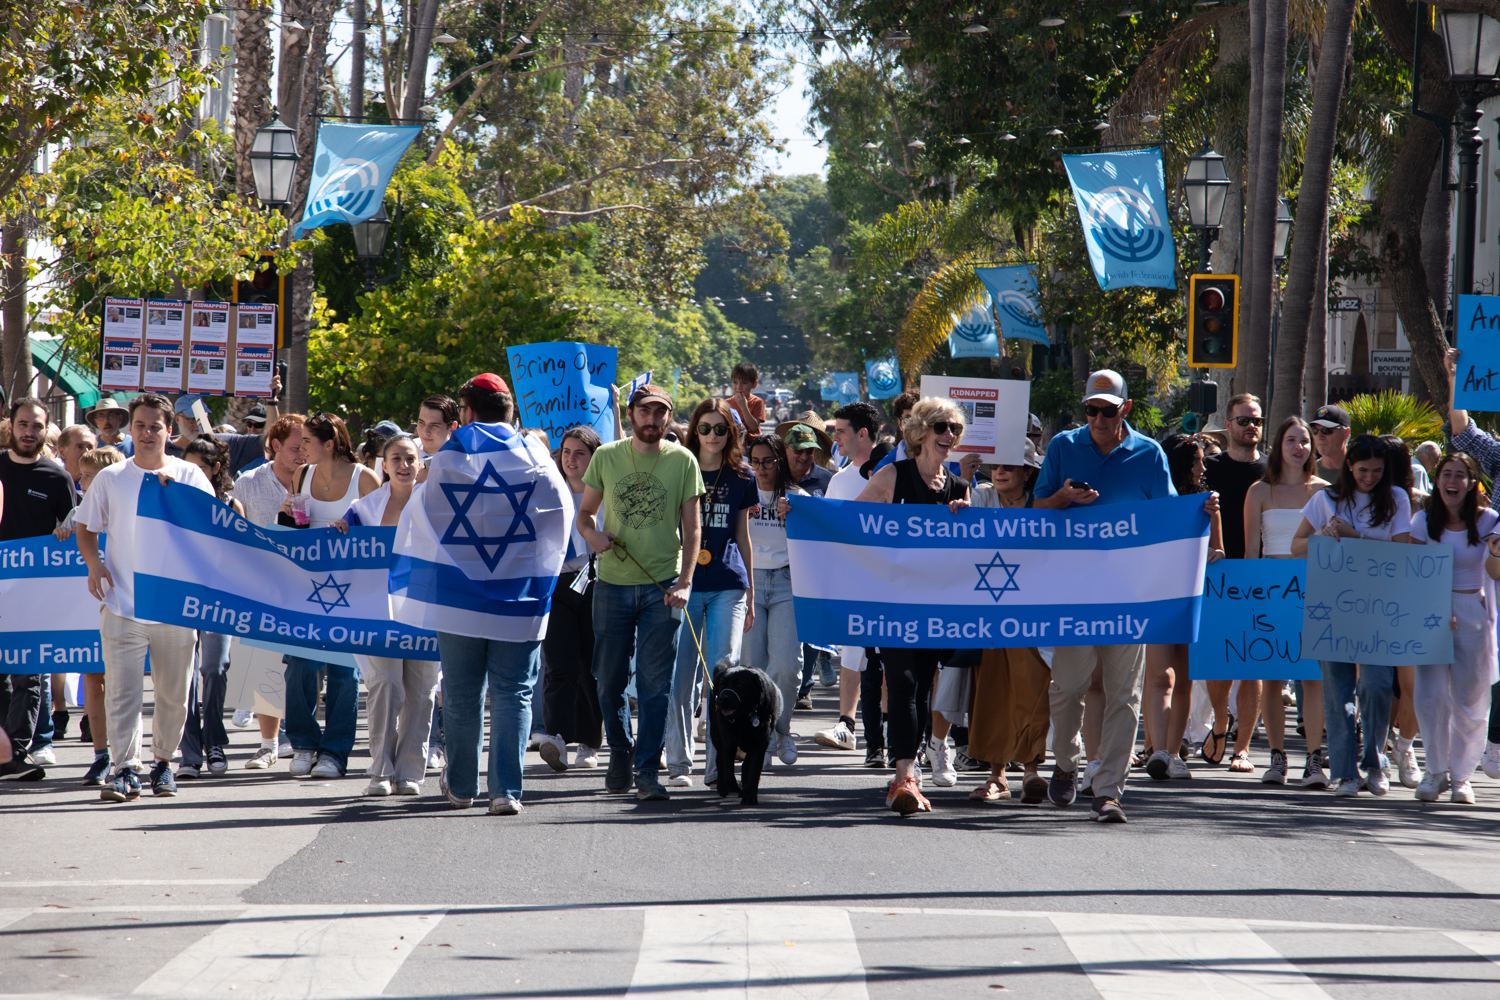 Jewish community members organize peaceful march to show the city of Santa Barbara that never again is now